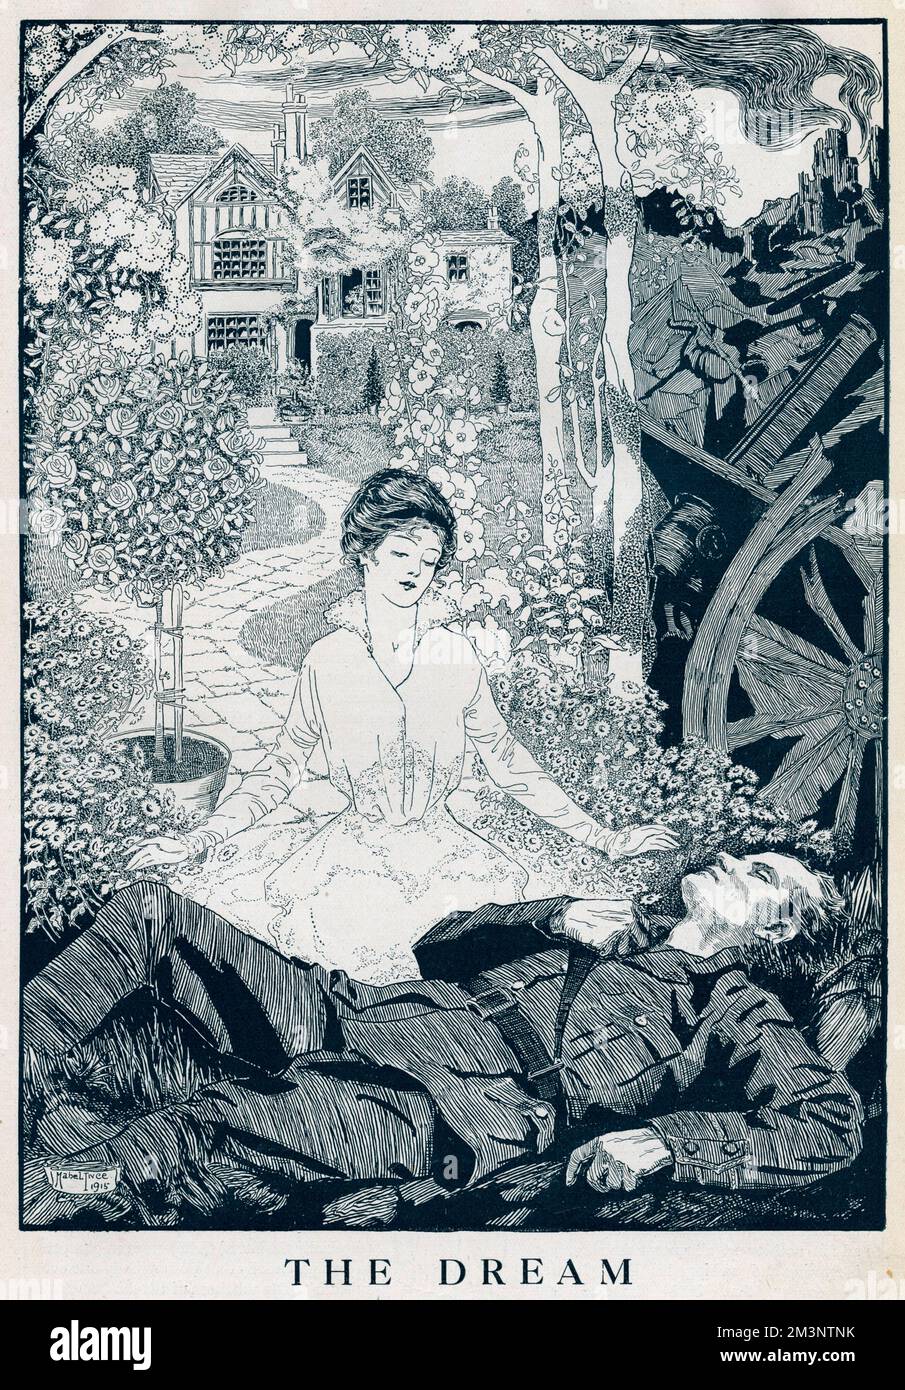 &quot;The Dream&quot;  A typical English country garden, timbered house and a saintly sweetheart inhabit the dreams of this slumbering soldier. Mabel Ince's style is prettily decorative, in the traditions of charles Robinson. Her talents extended beyond illustration, and she was the author of romantic novels whose titles imitate the dreamy romance of her picture - The Wisom of Waiting and Commonplace and Clementine, published in 1912 and 1913 respectively.   1915 Stock Photo